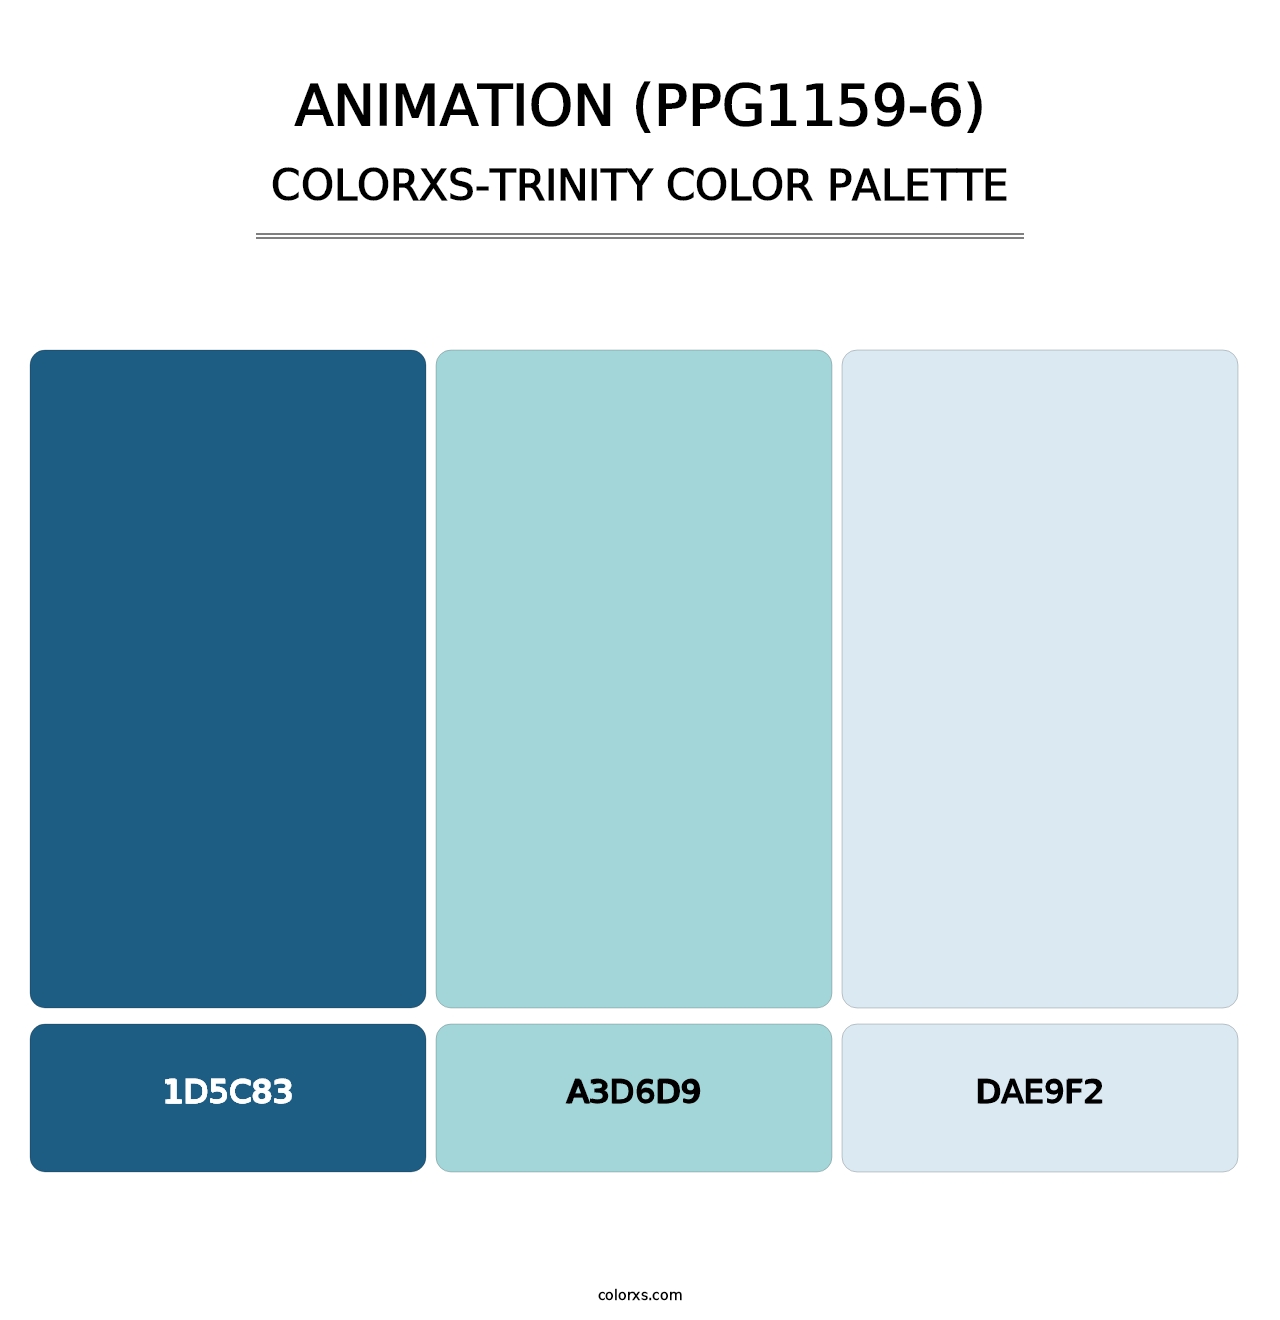 Animation (PPG1159-6) - Colorxs Trinity Palette